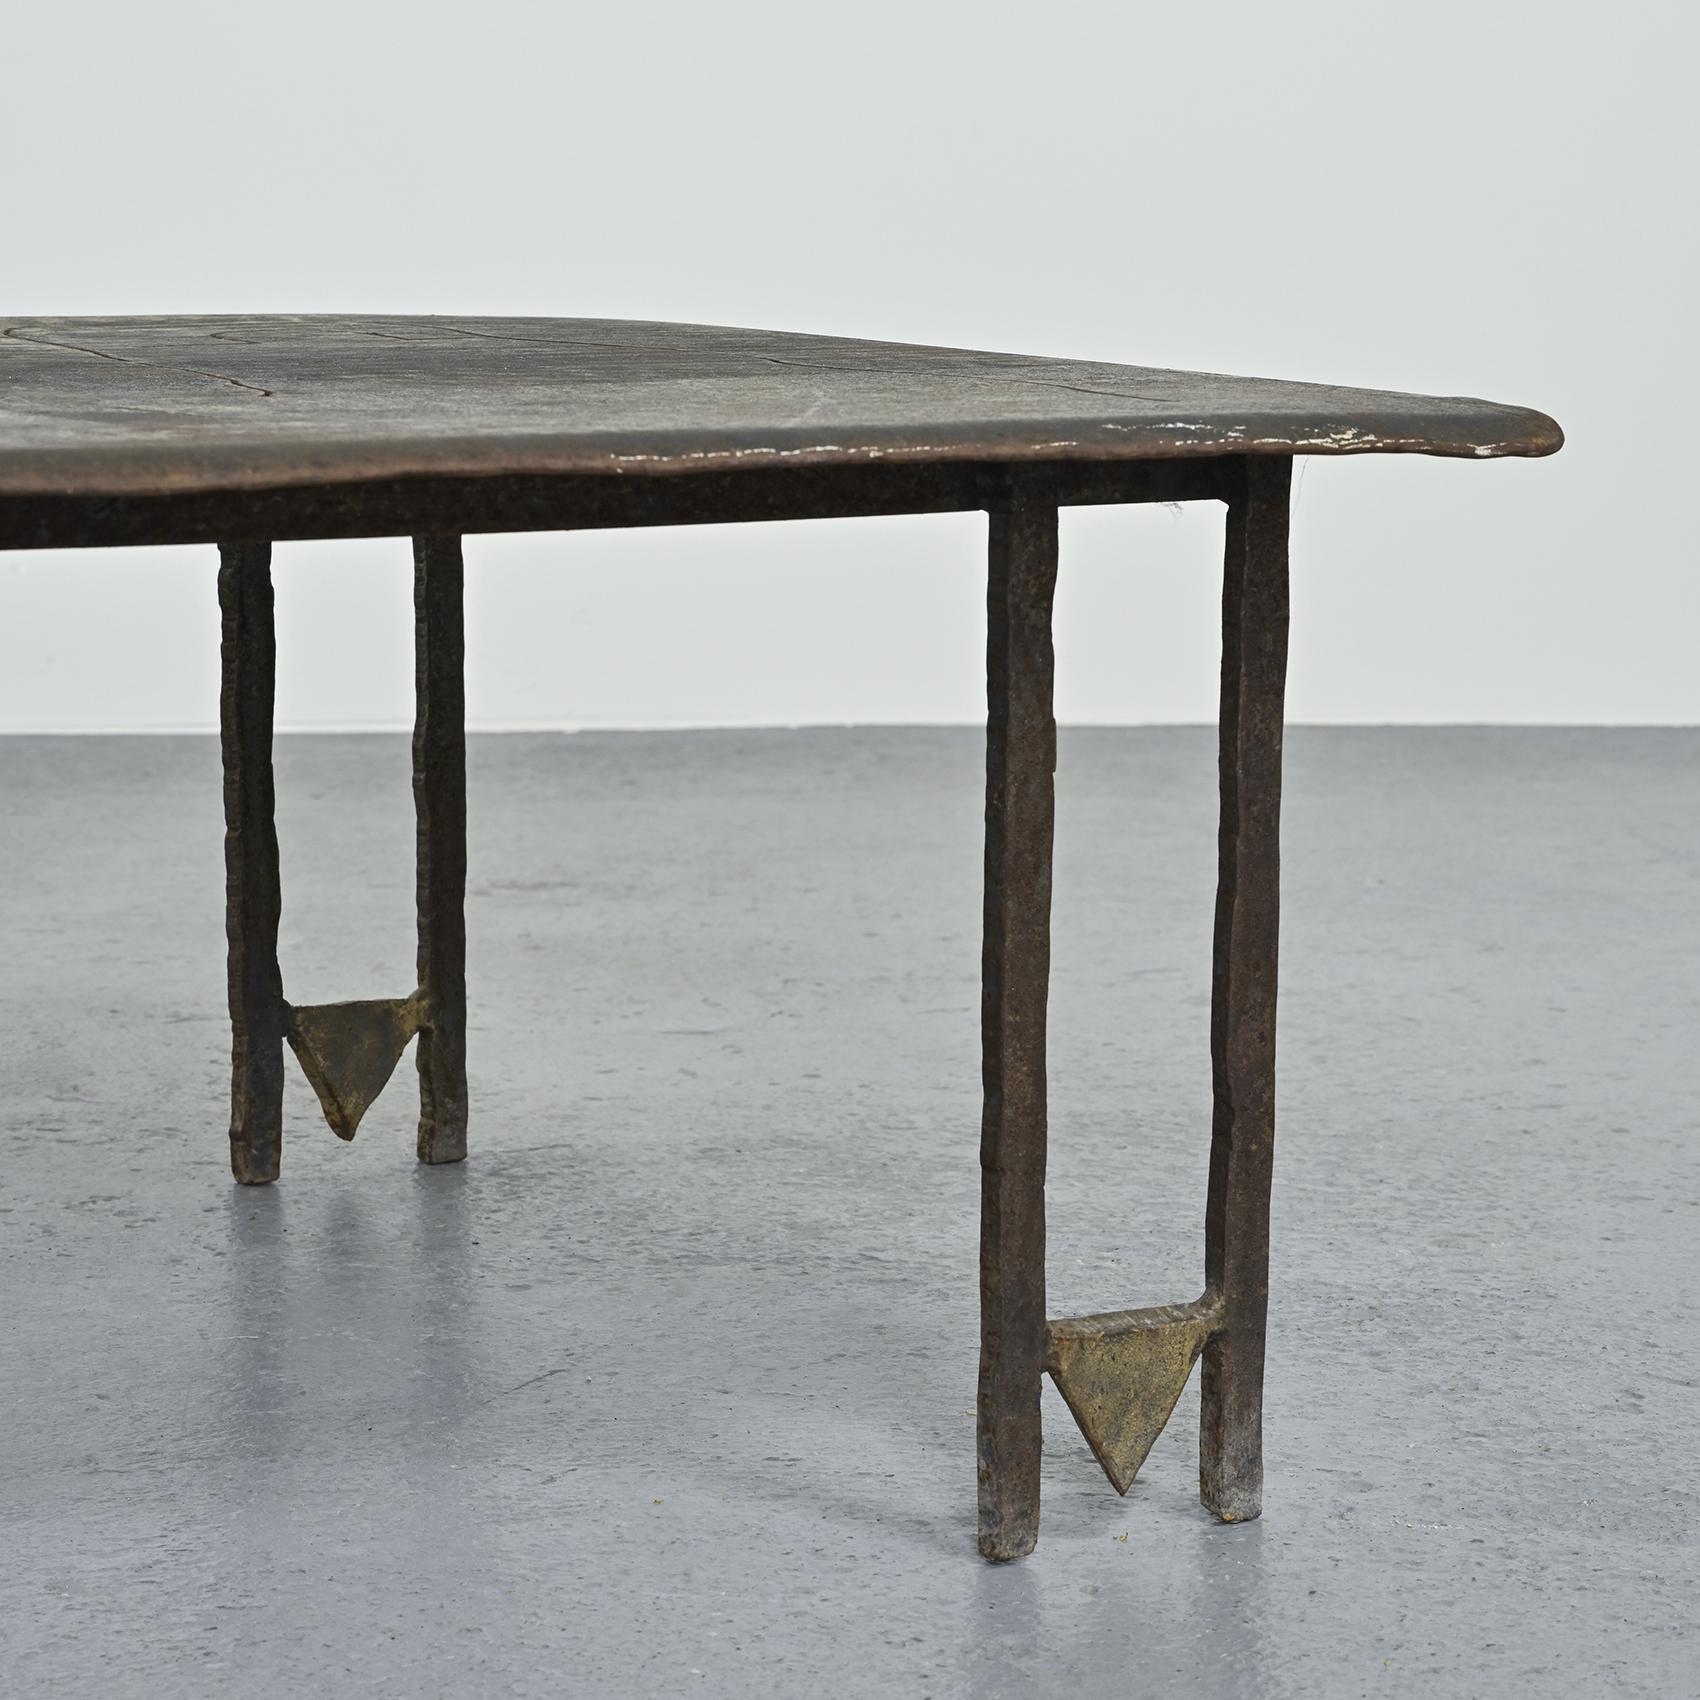 
Rectangular-top coffee table by French sculptor Jean-Jacques Argueyrolles, circa 1990.

The model is in drilled and re-oxidized sheet steel, with parts worked in oxidized bronze leaf. The top features a pattern with stylized figures, and rests on